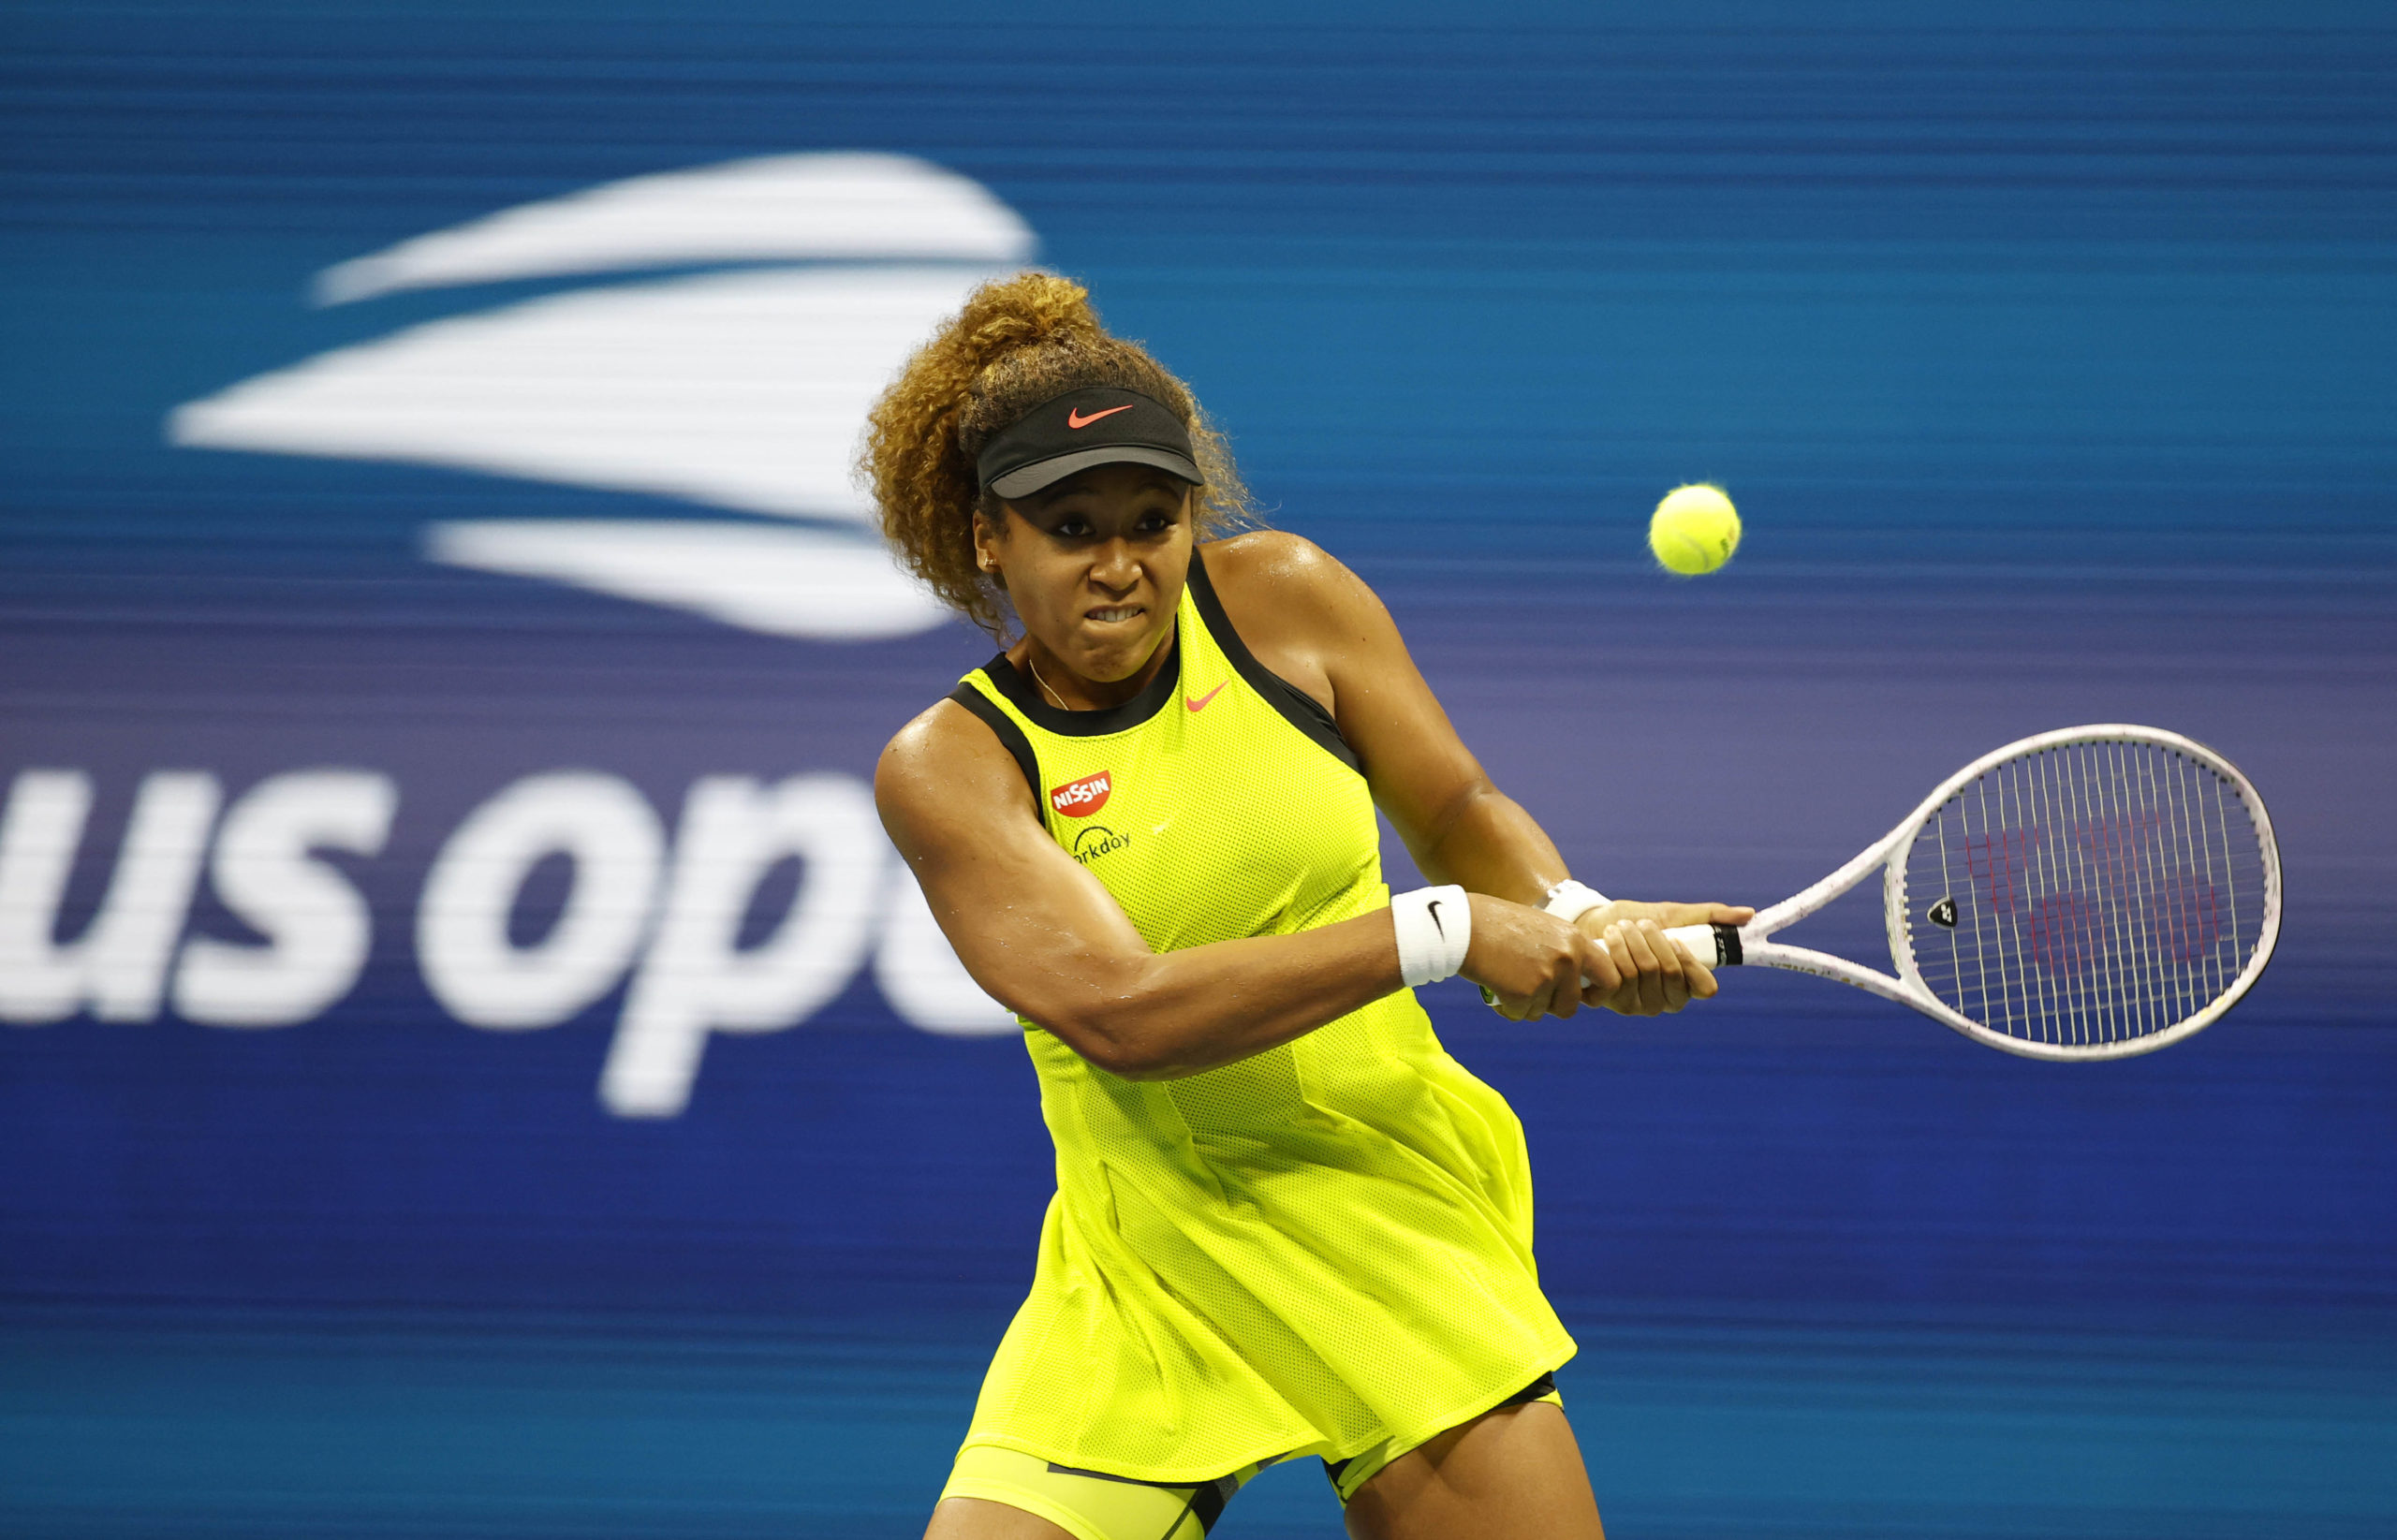 Naomi Osaka of Japan in action against Marie Bouzkova of Czech Republic in the first round on day one of the 2021 U.S. Open tennis tournament at USTA Billie King National Tennis Center.